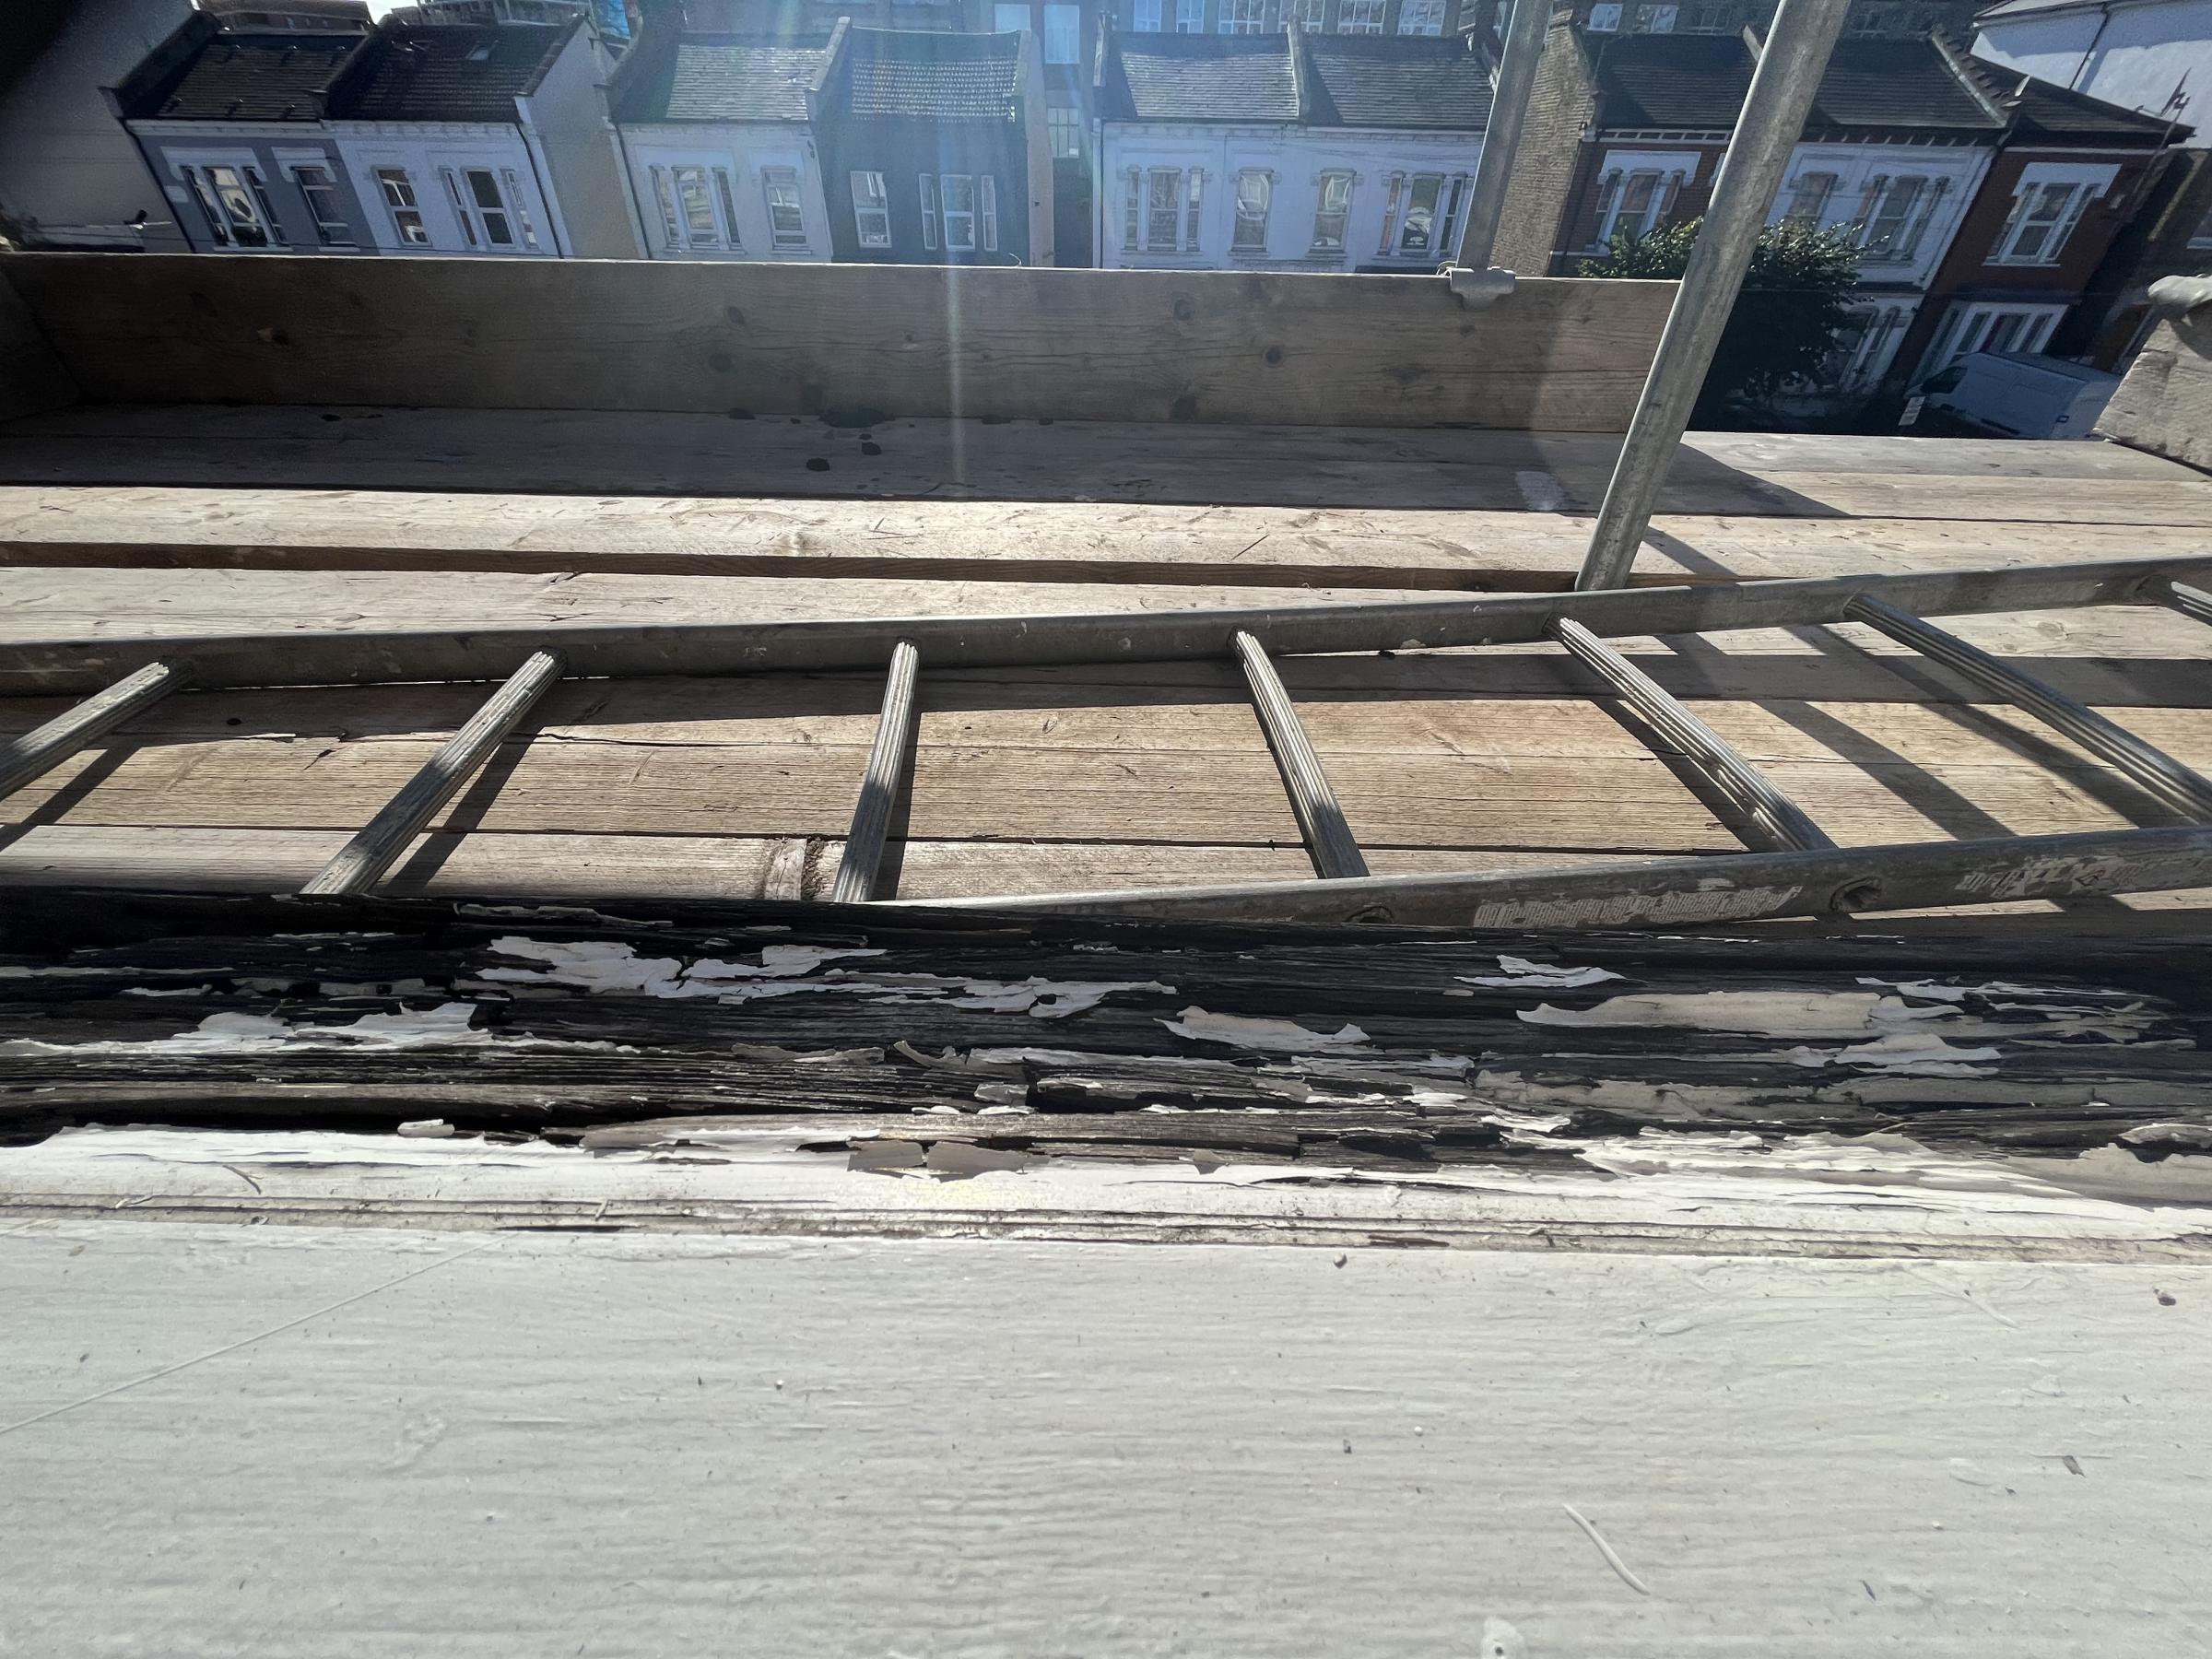 Scaffolding was left up around the house while a rotting windowsill went unfixed. Photo: Roxanne Misir